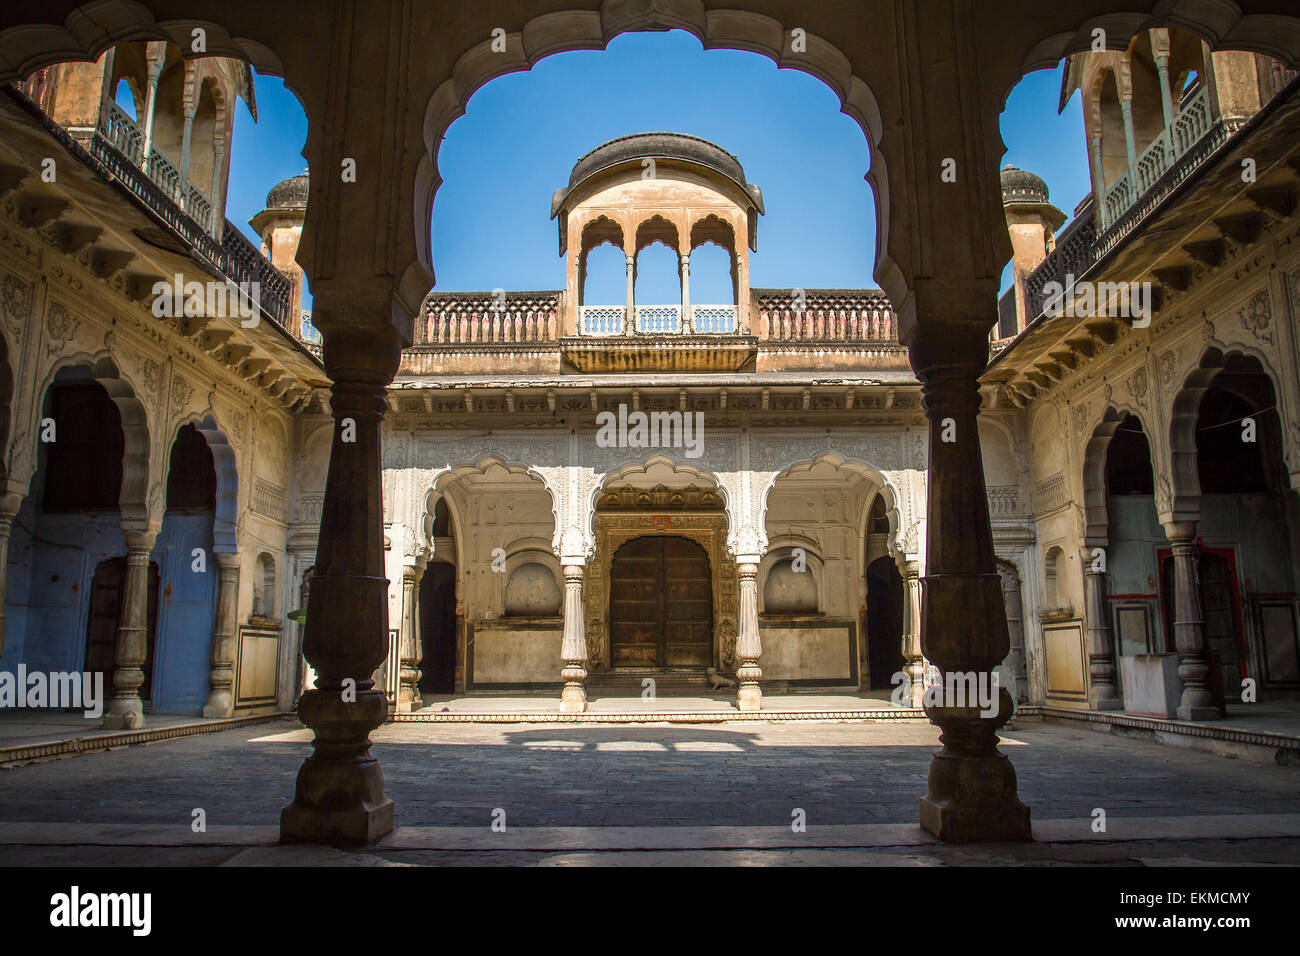 Bel cortile dell'Amber Fort palace vicino a Jaipur, Rajasthan, India Foto Stock